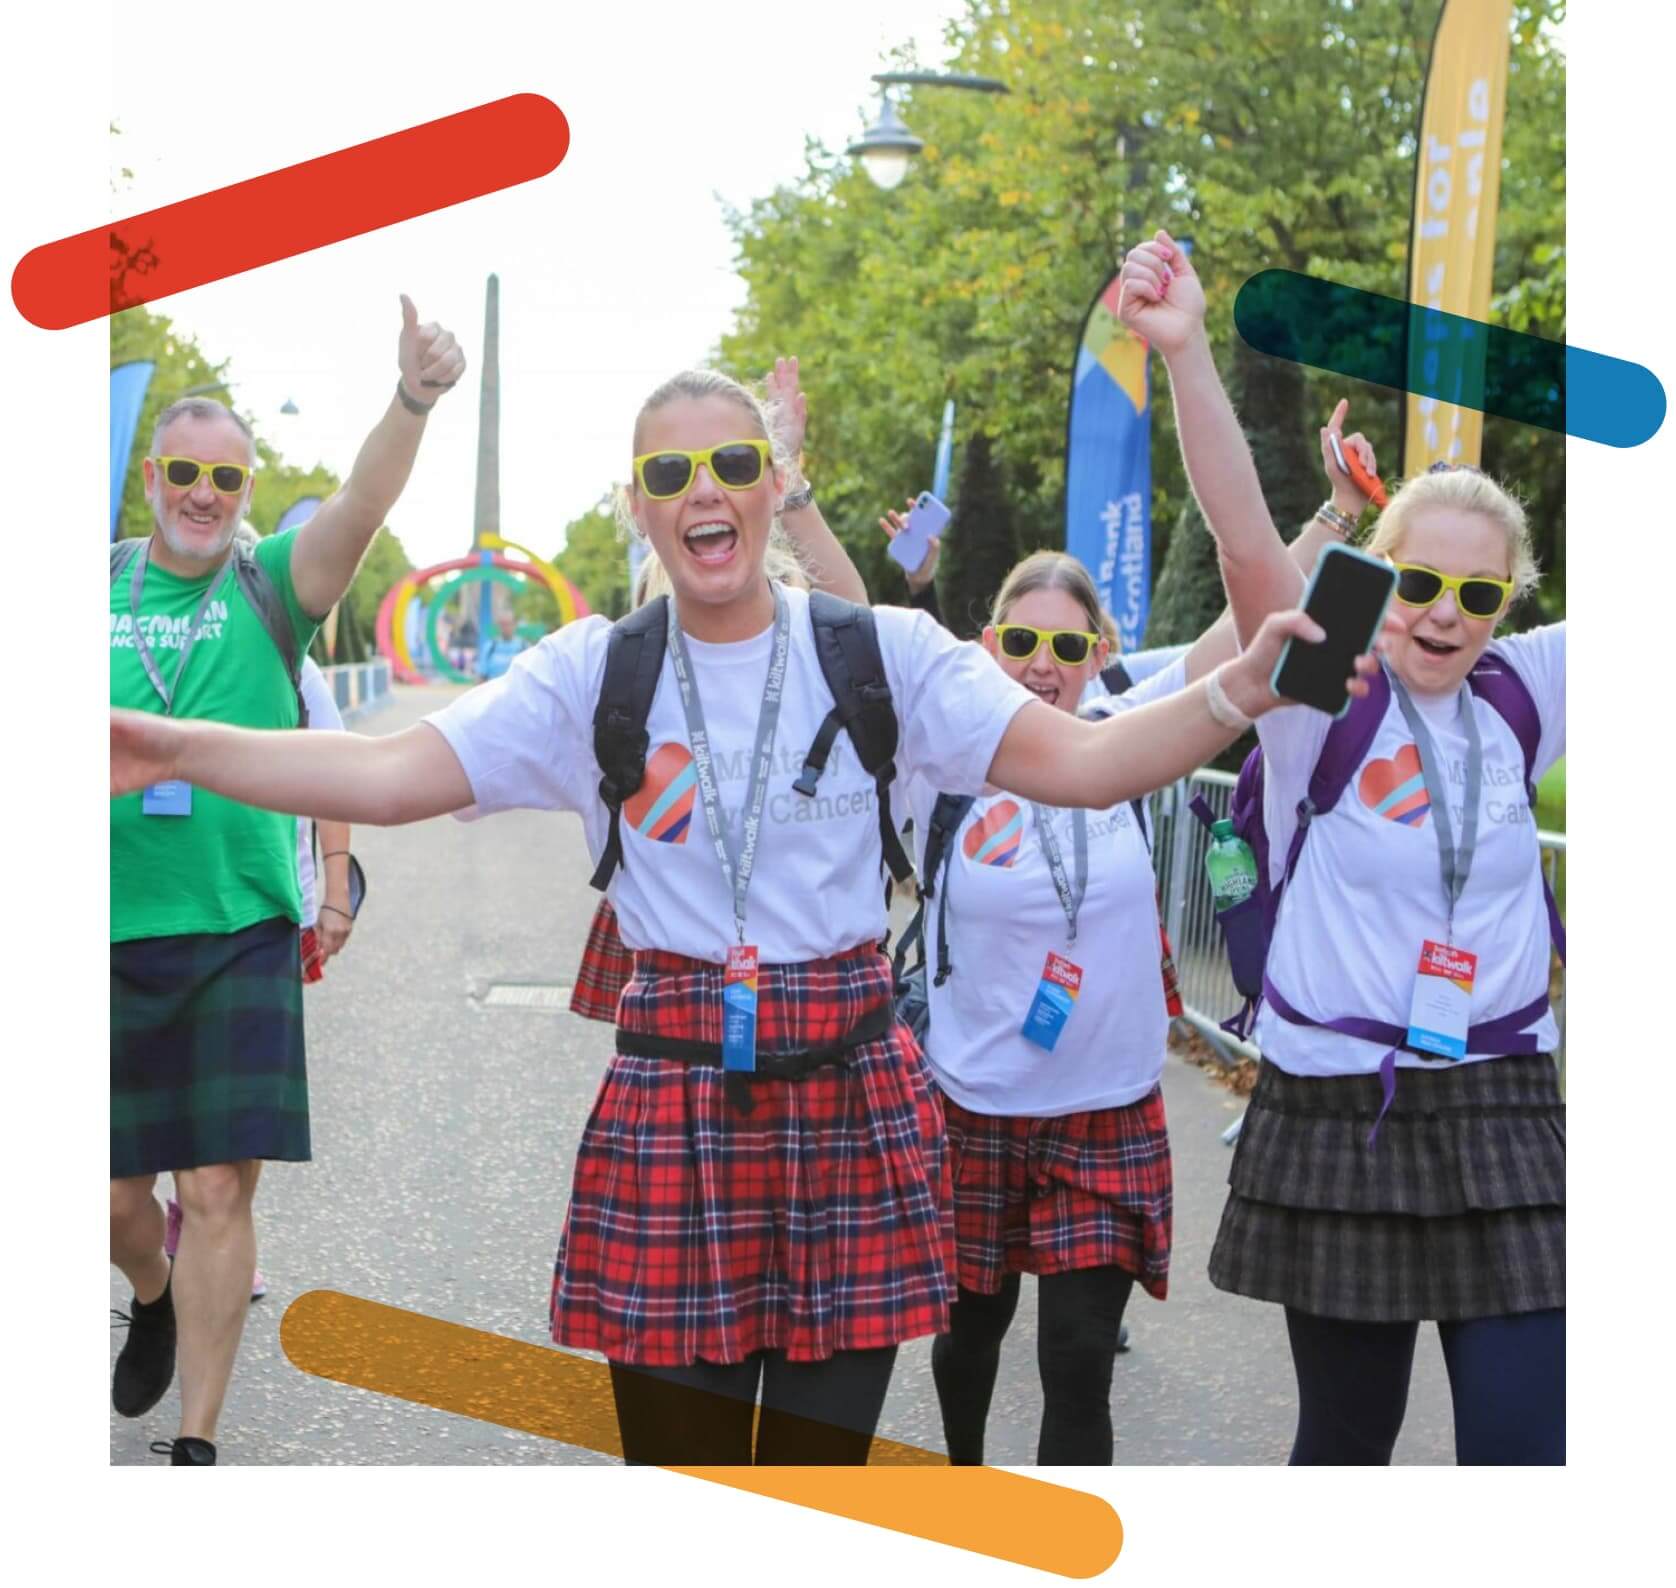 Group photo of people at the Kiltwalk